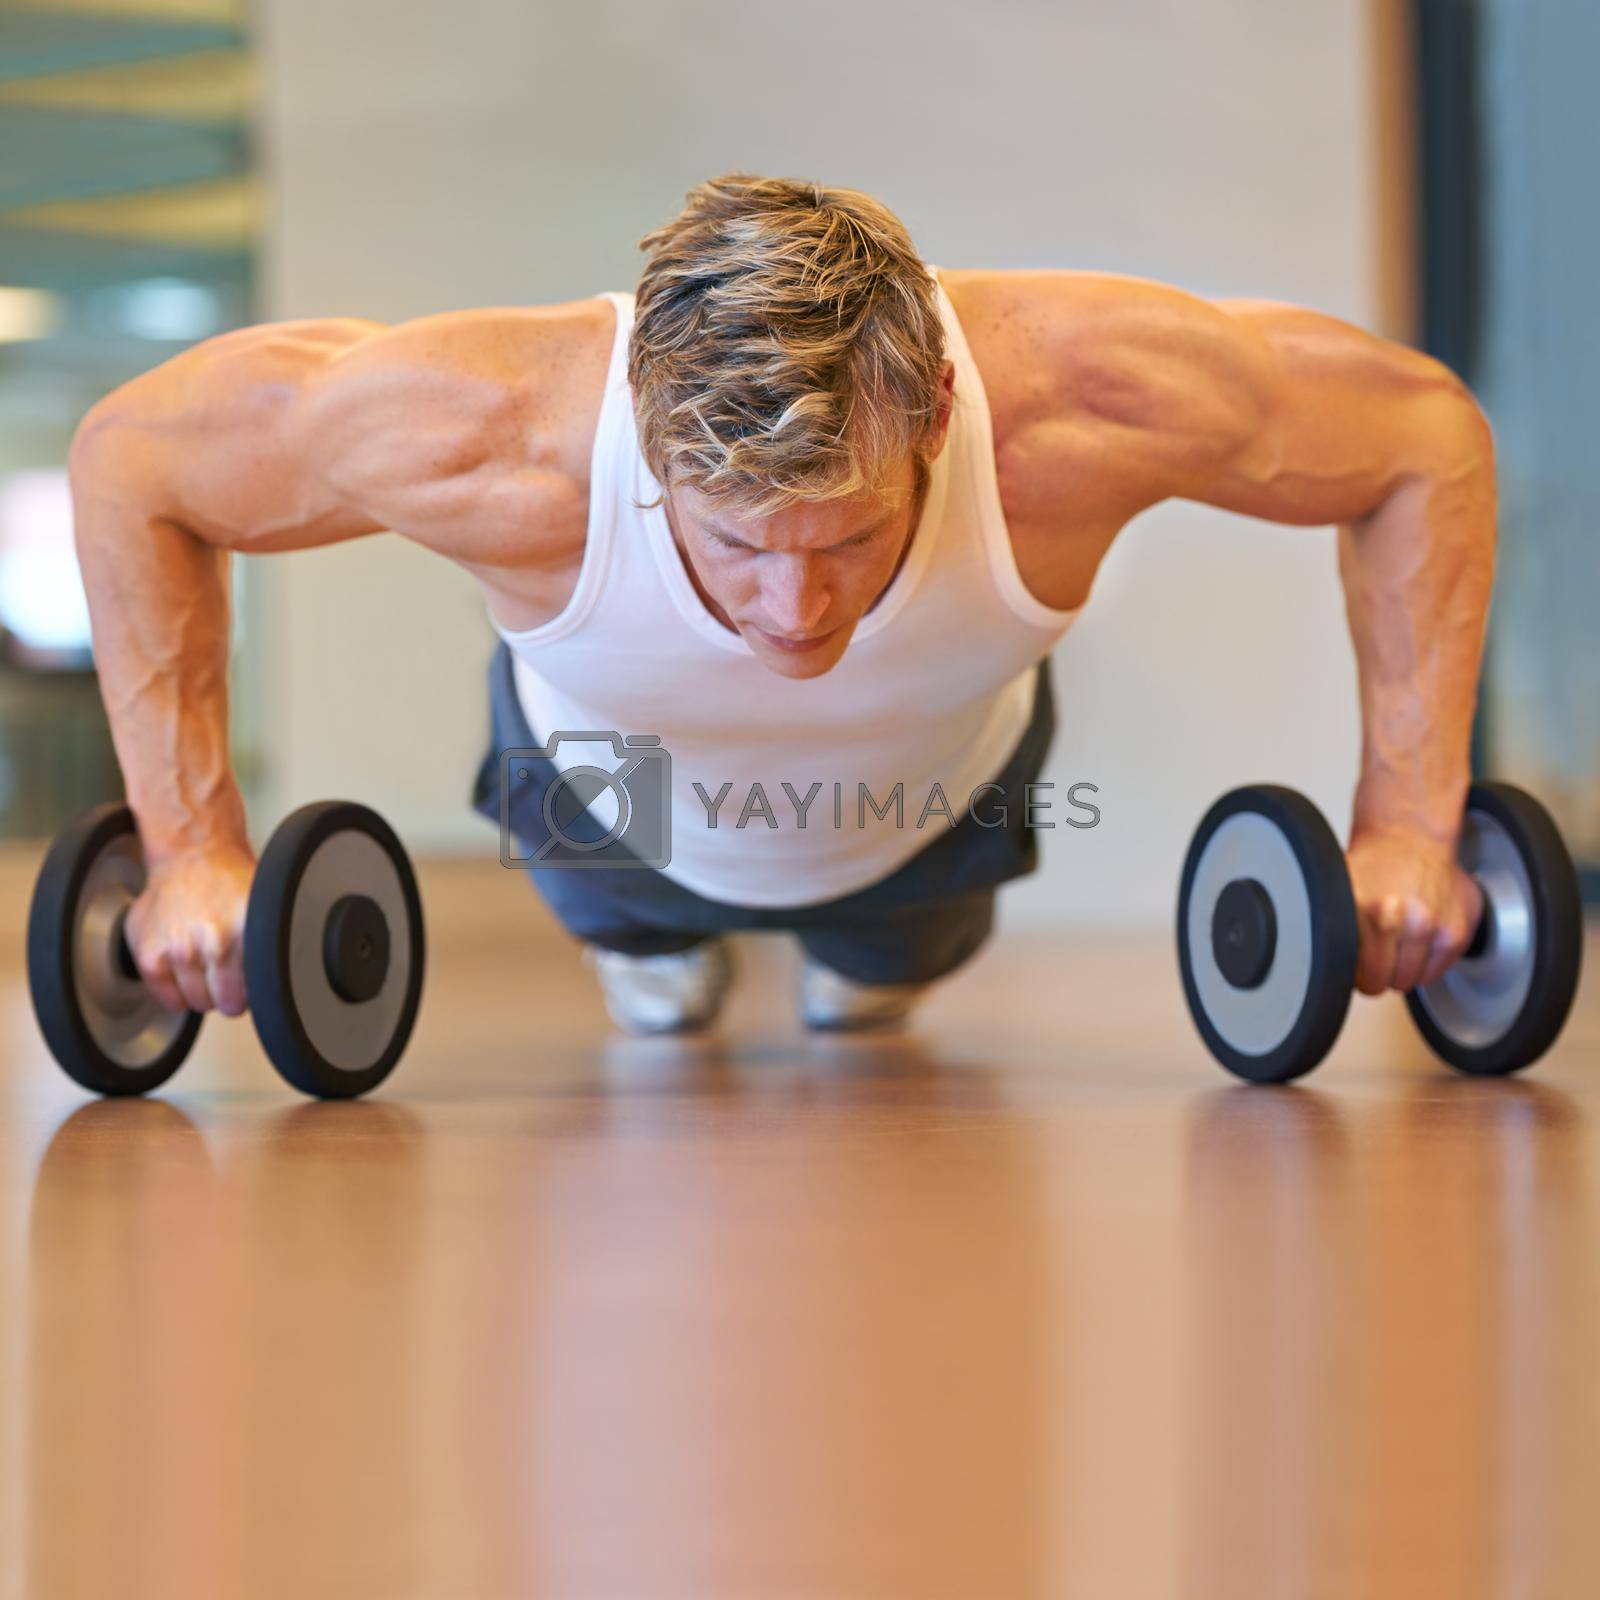 Royalty free image of Doing some push-ups. Fit young man doing push ups in a health club using dumbbells. by YuriArcurs